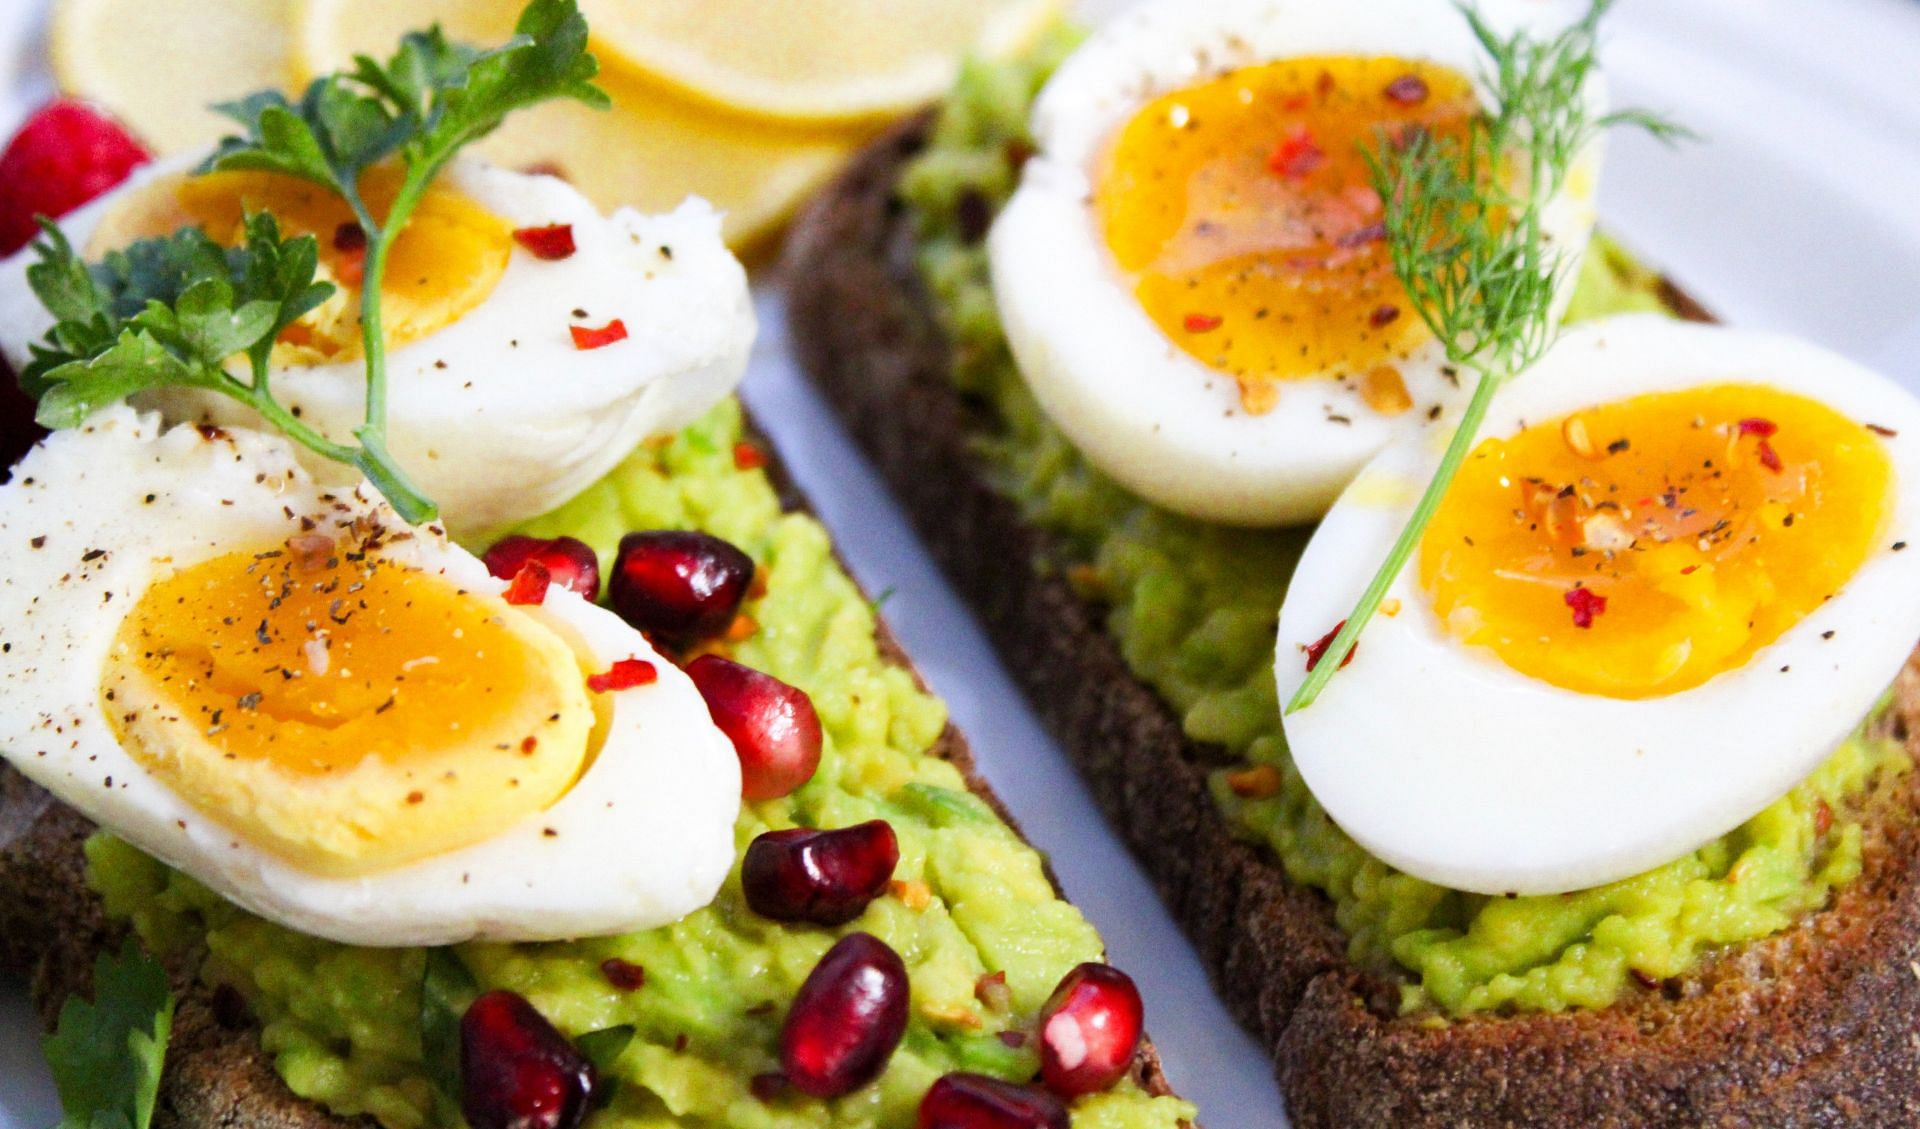 Eat a protein and fat rich breakfast of eggs to jumpstart weight loss (Image via Pexels @Jane Doan)